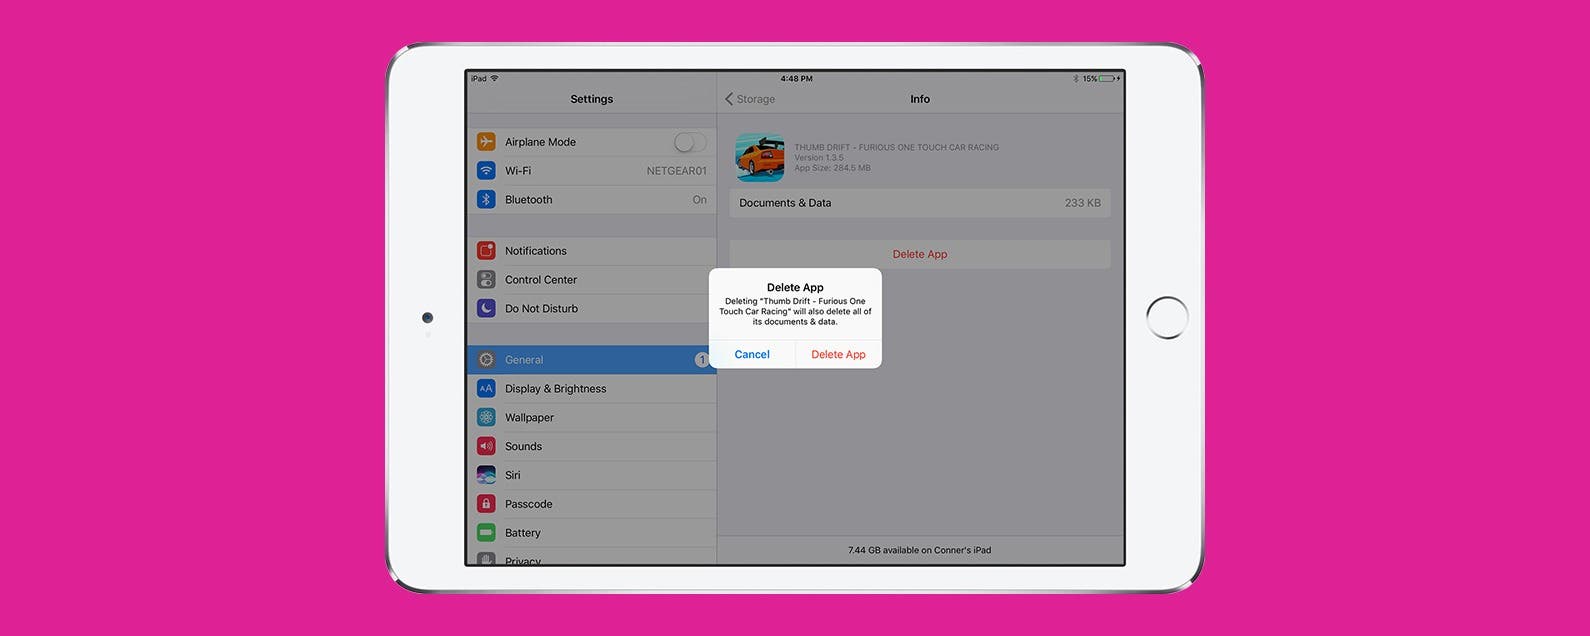 Delete Remove Uninstall How To Get Rid Of Apps On The Ipad - how to get robux with itunes card on ipad